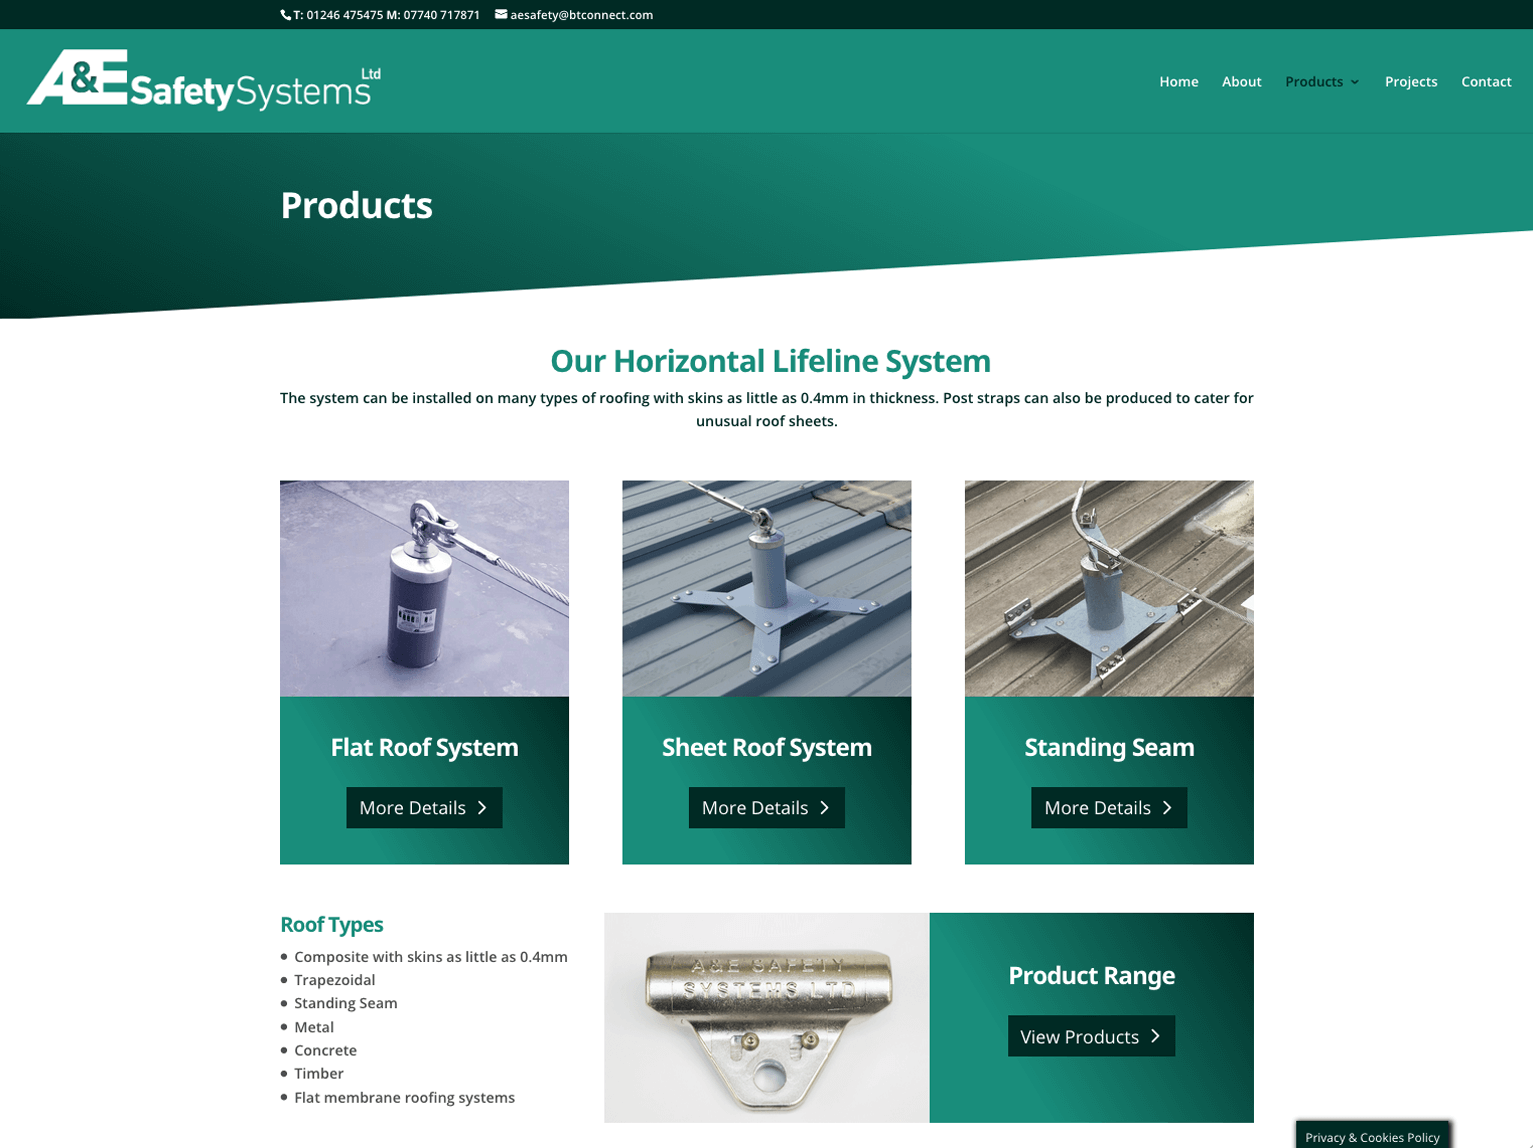 A & E Safety Systems website product page